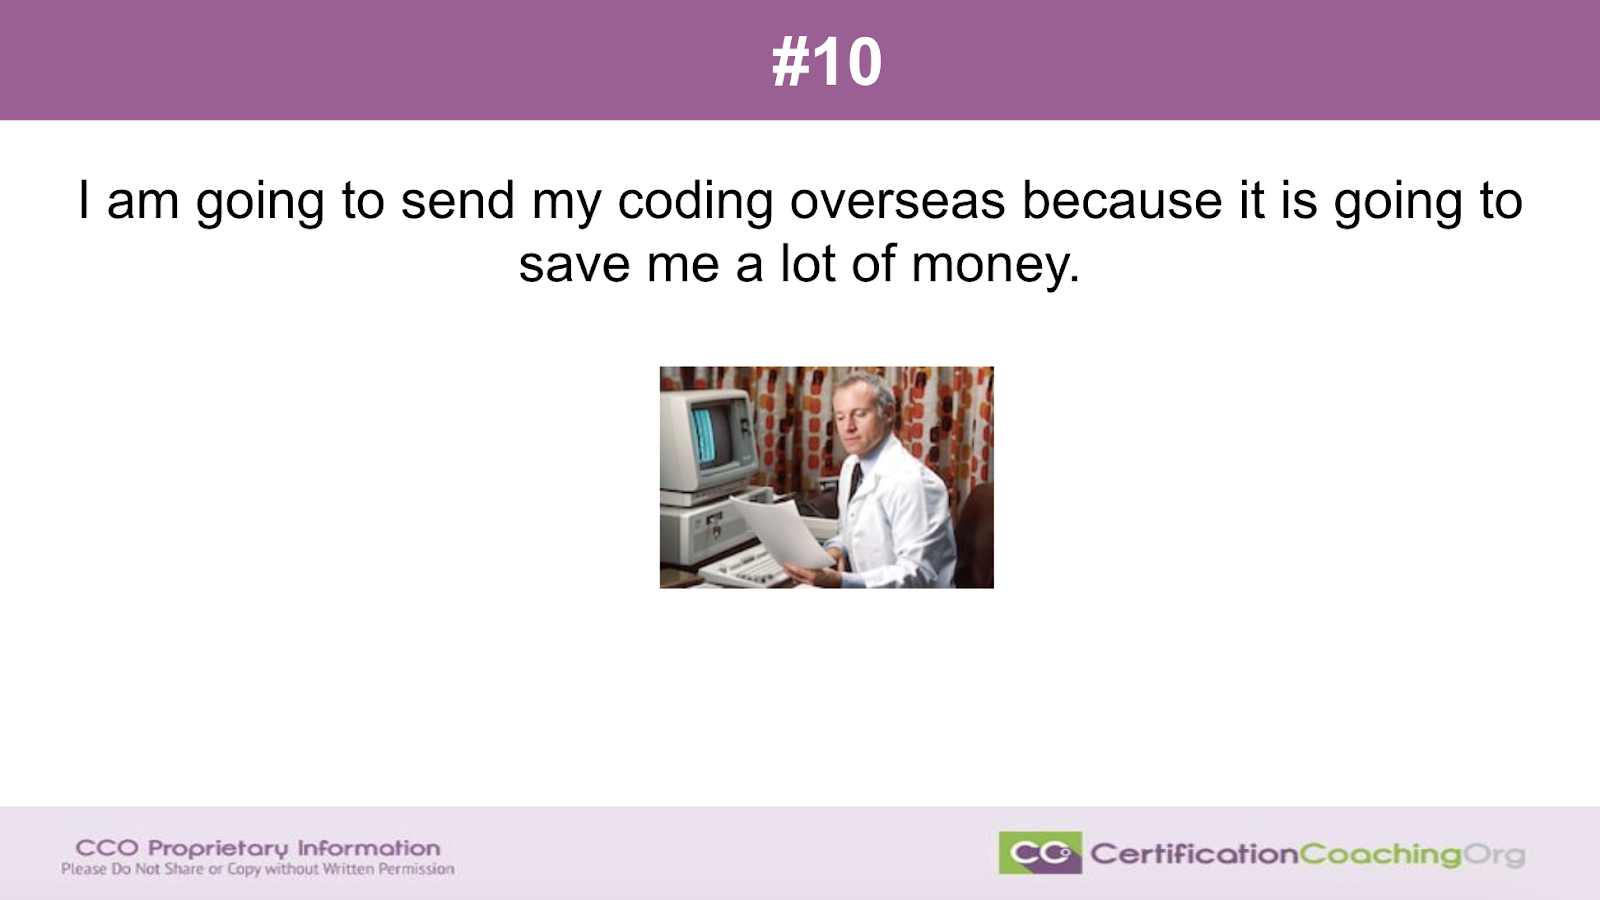 #10 I'm Going To Send My Coding Overseas Because It's Going To Save Me A Lot Of Money